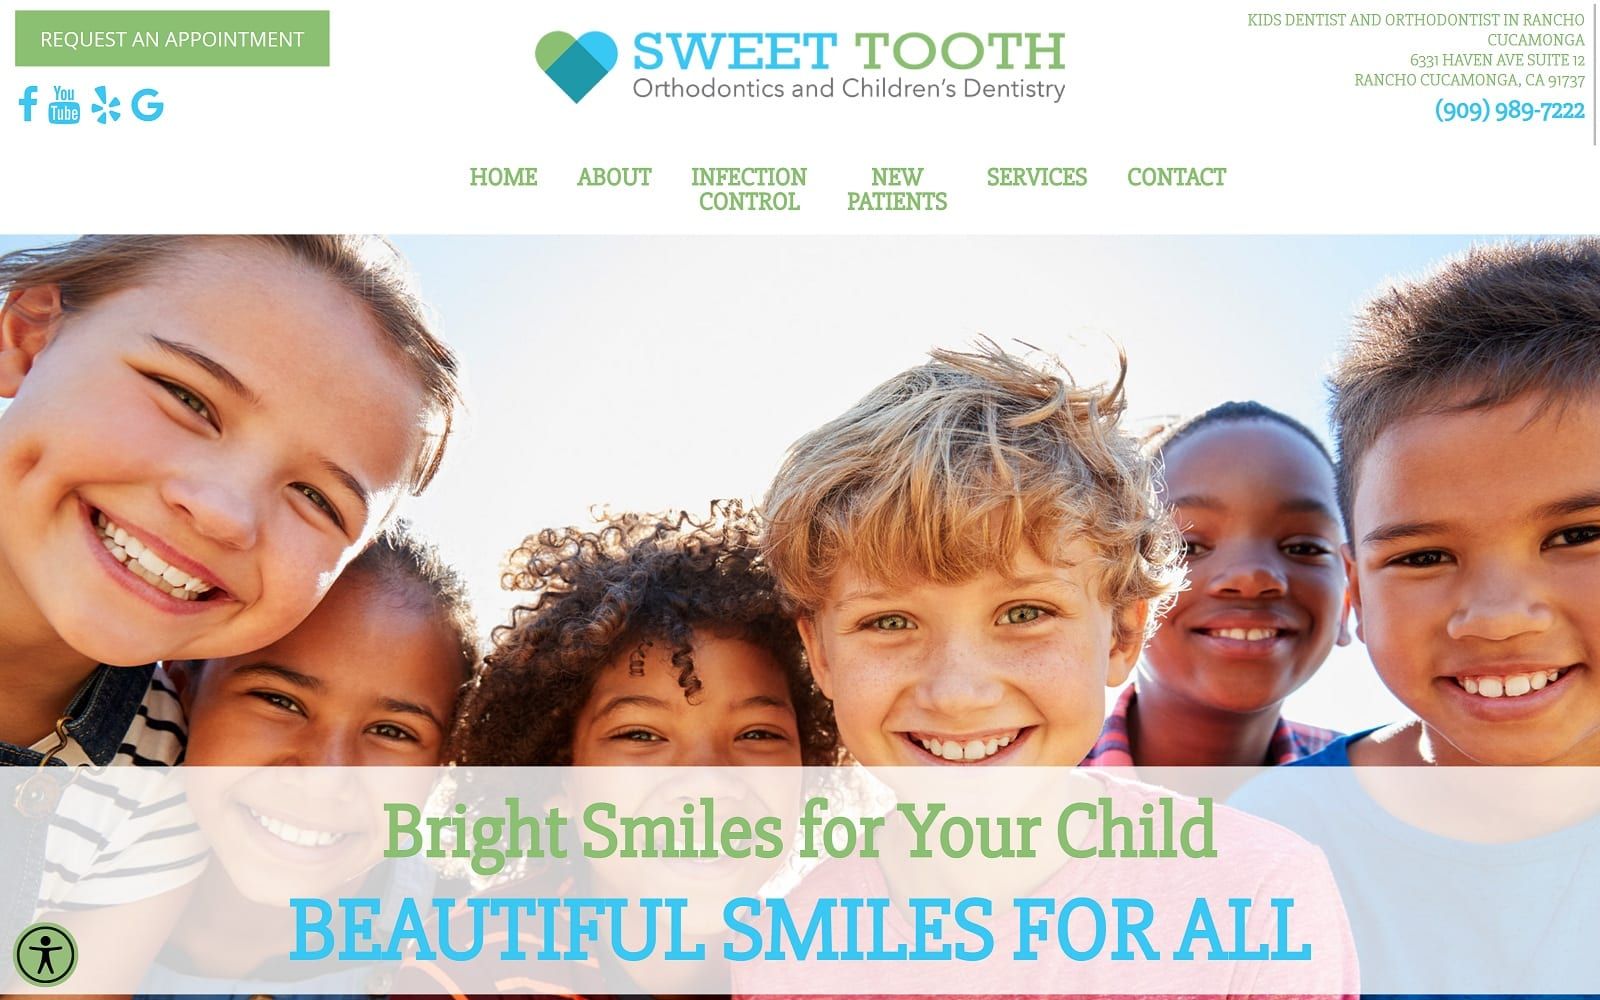 The screenshot of sweet tooth orthodontics and children's dentistry lovesweettooth. Com website